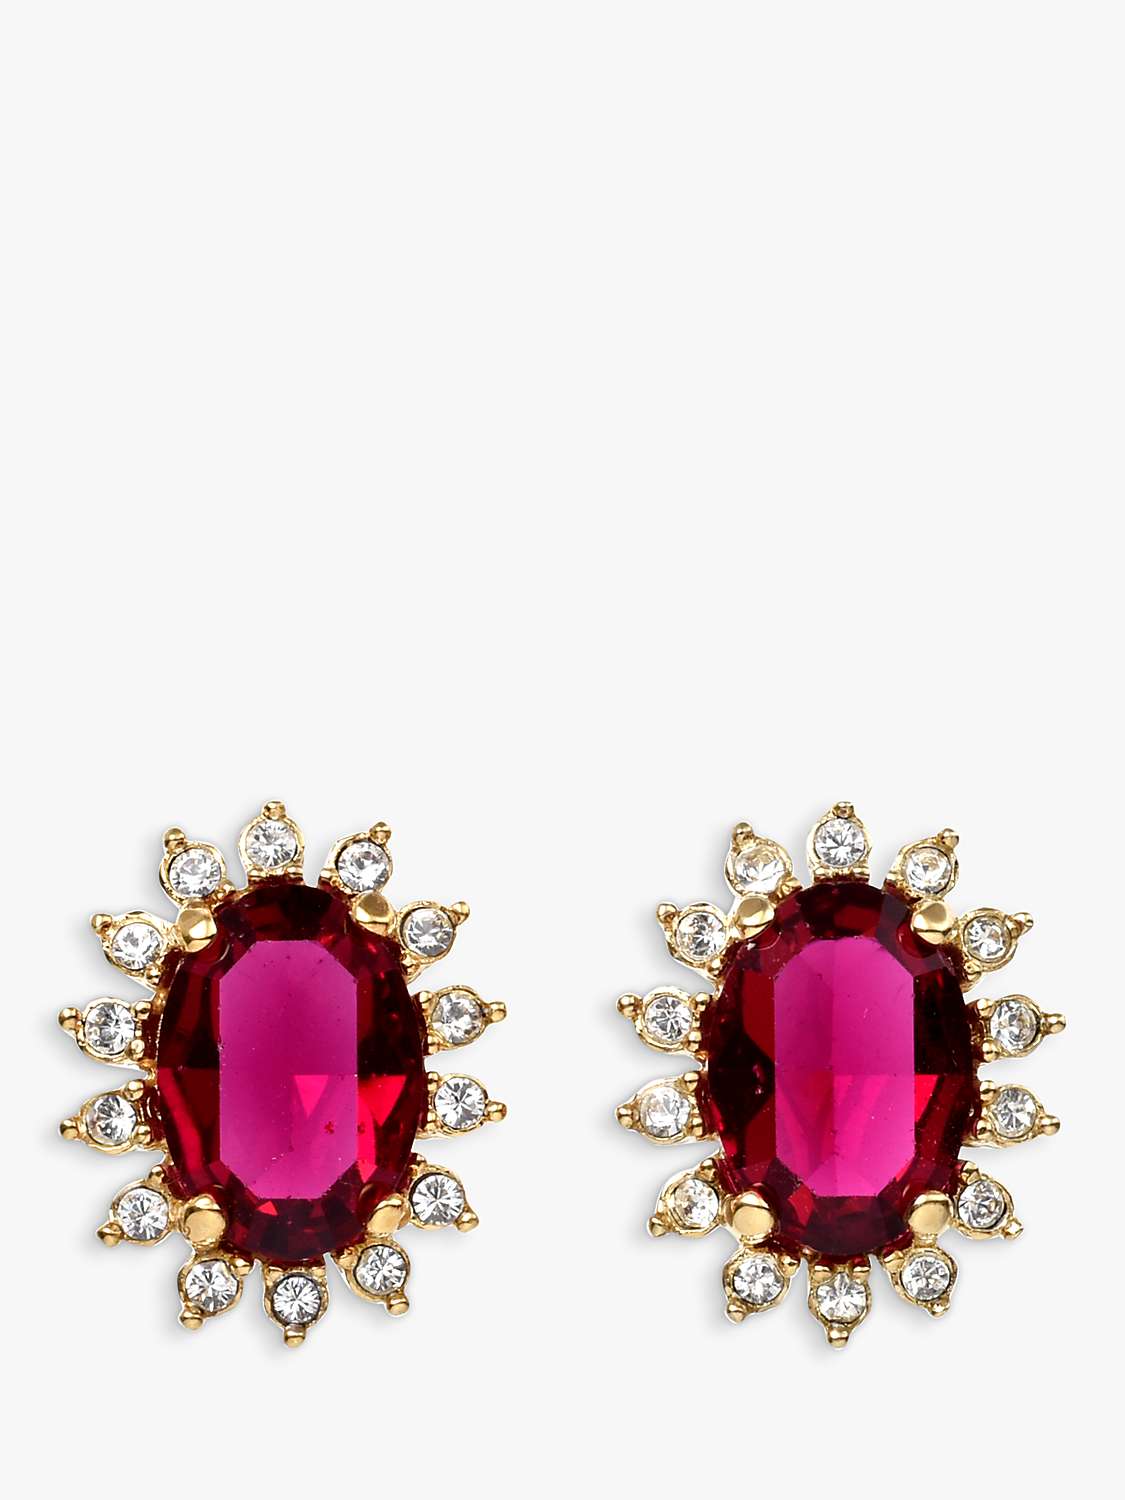 Buy Eclectica Vintage Swarovski Crystal Radial Clip-On Earrings, Dated Circa 1980s Online at johnlewis.com